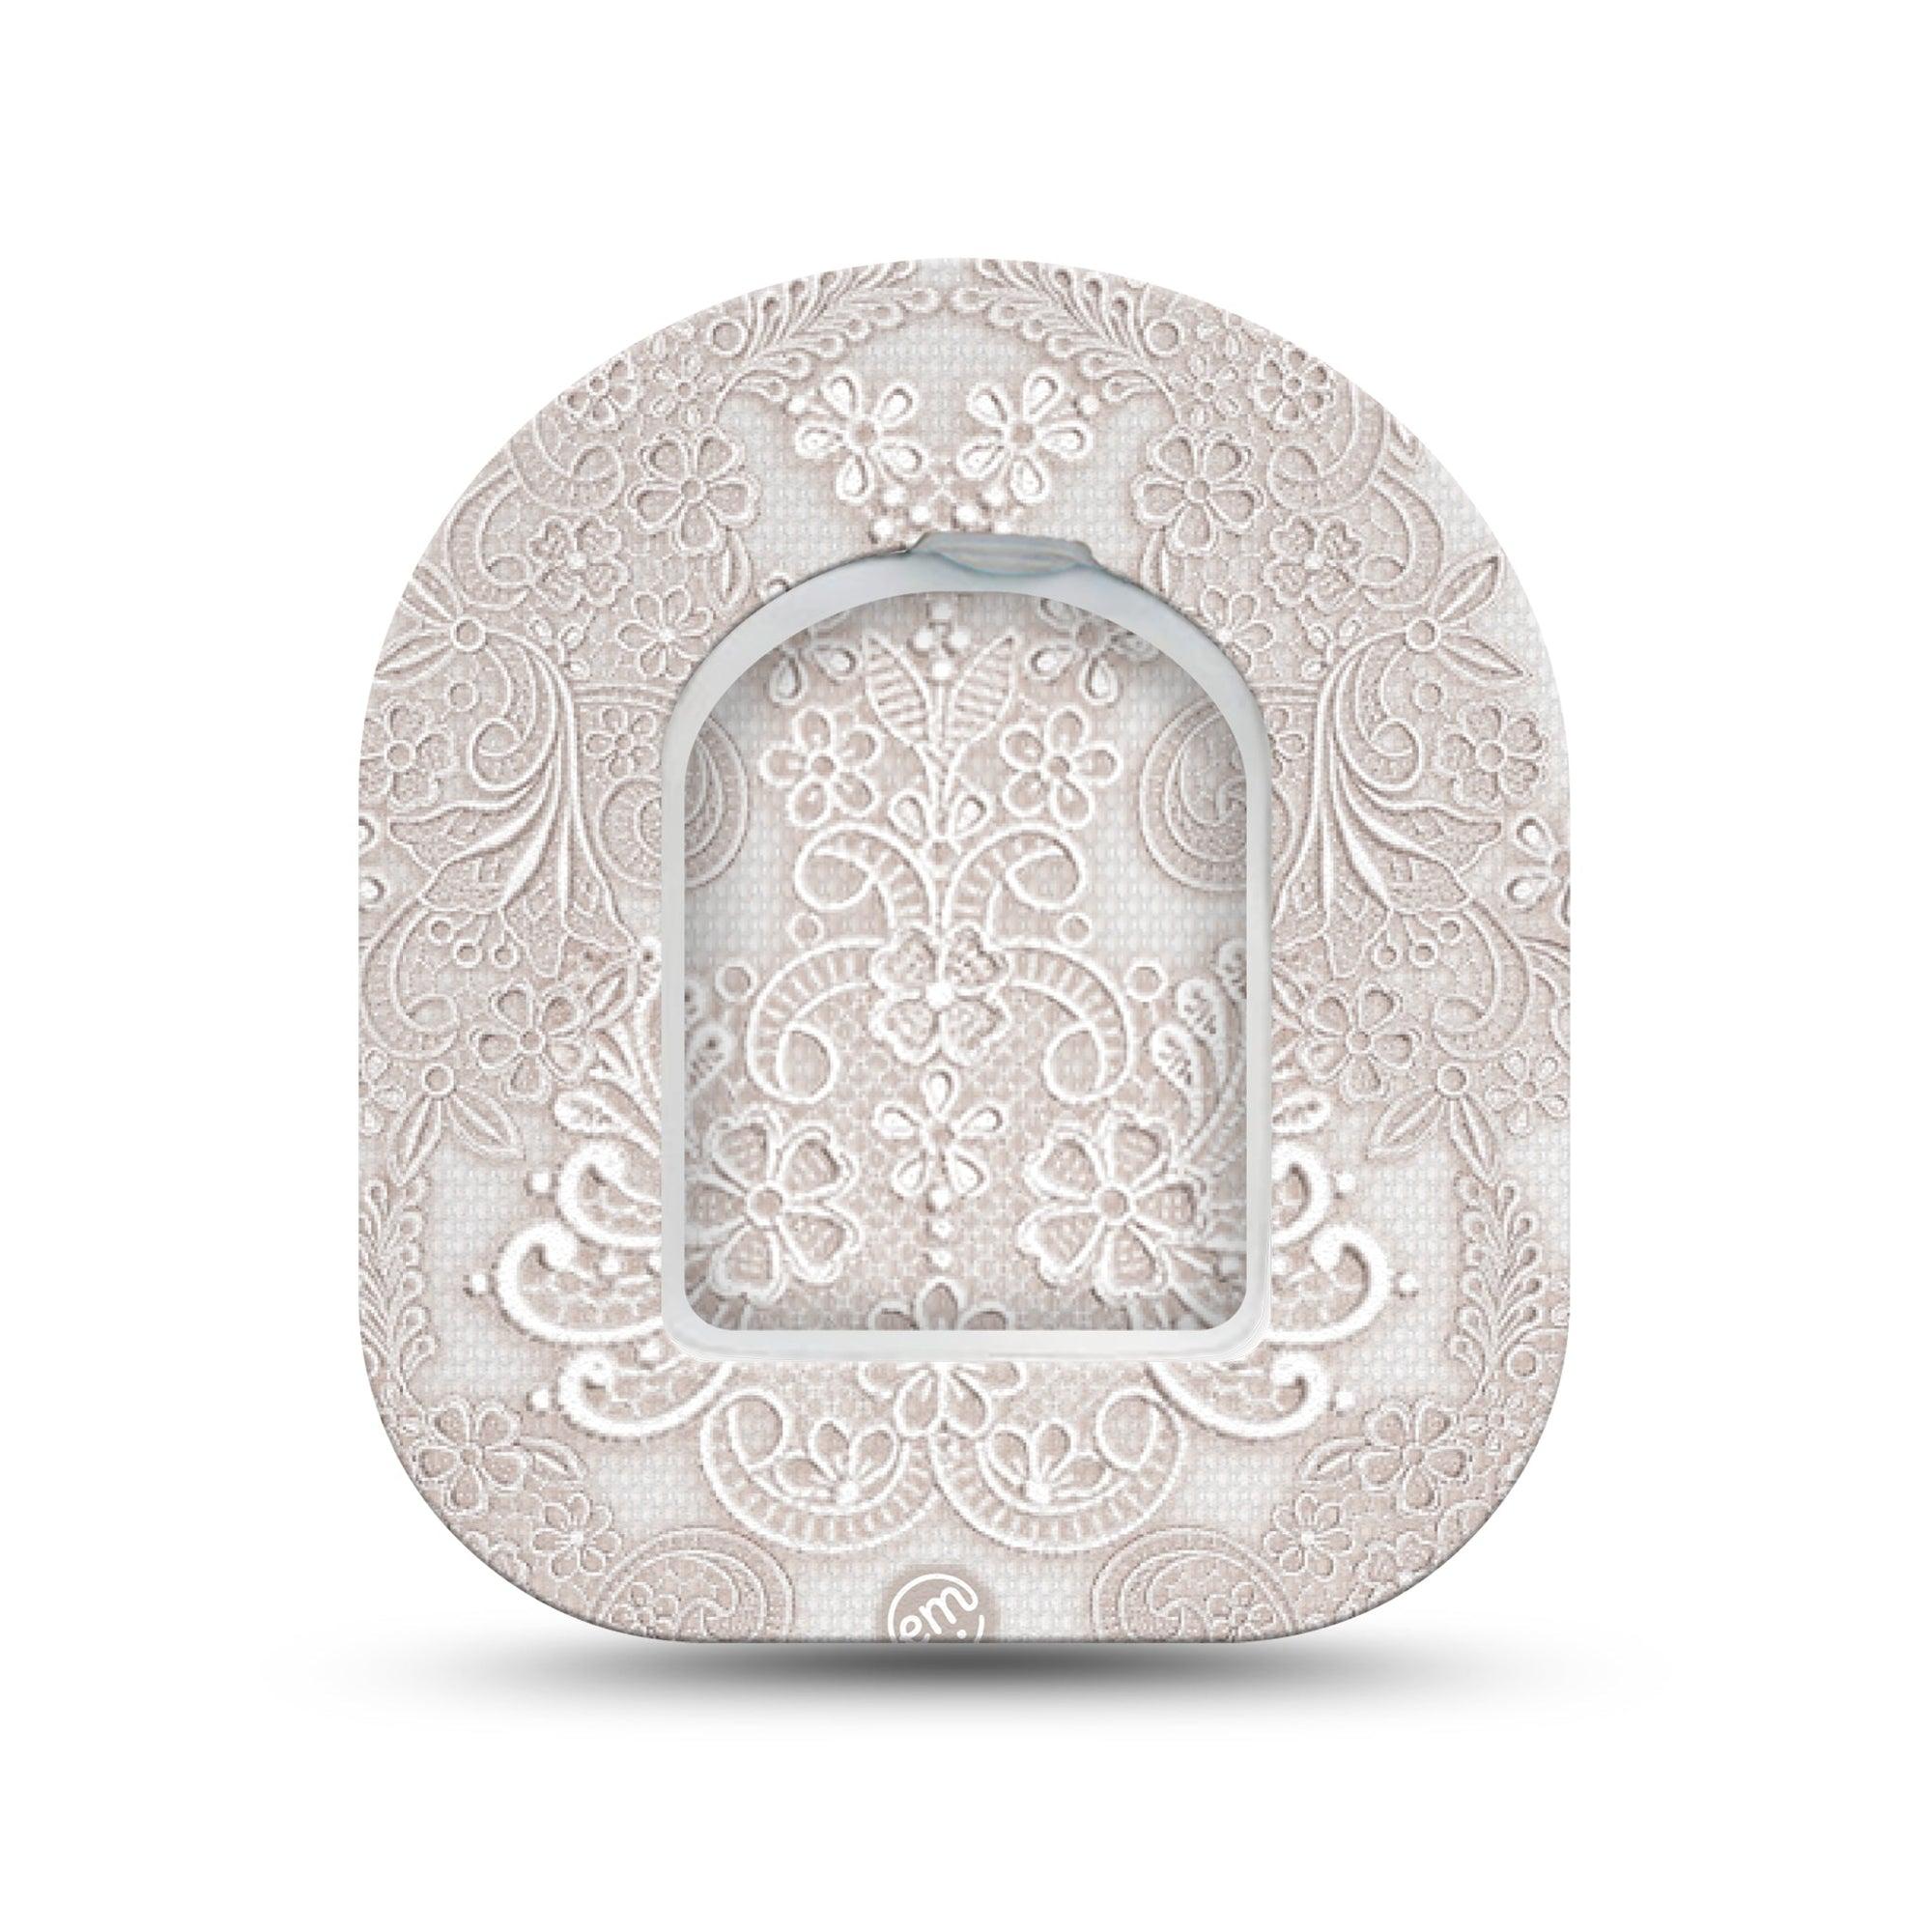 ExpressionMed Vintage Lace Omnipod Surface Center Sticker and Mini Tape White Fabric Inspired Vinyl Sticker and Tape Design Pump Design